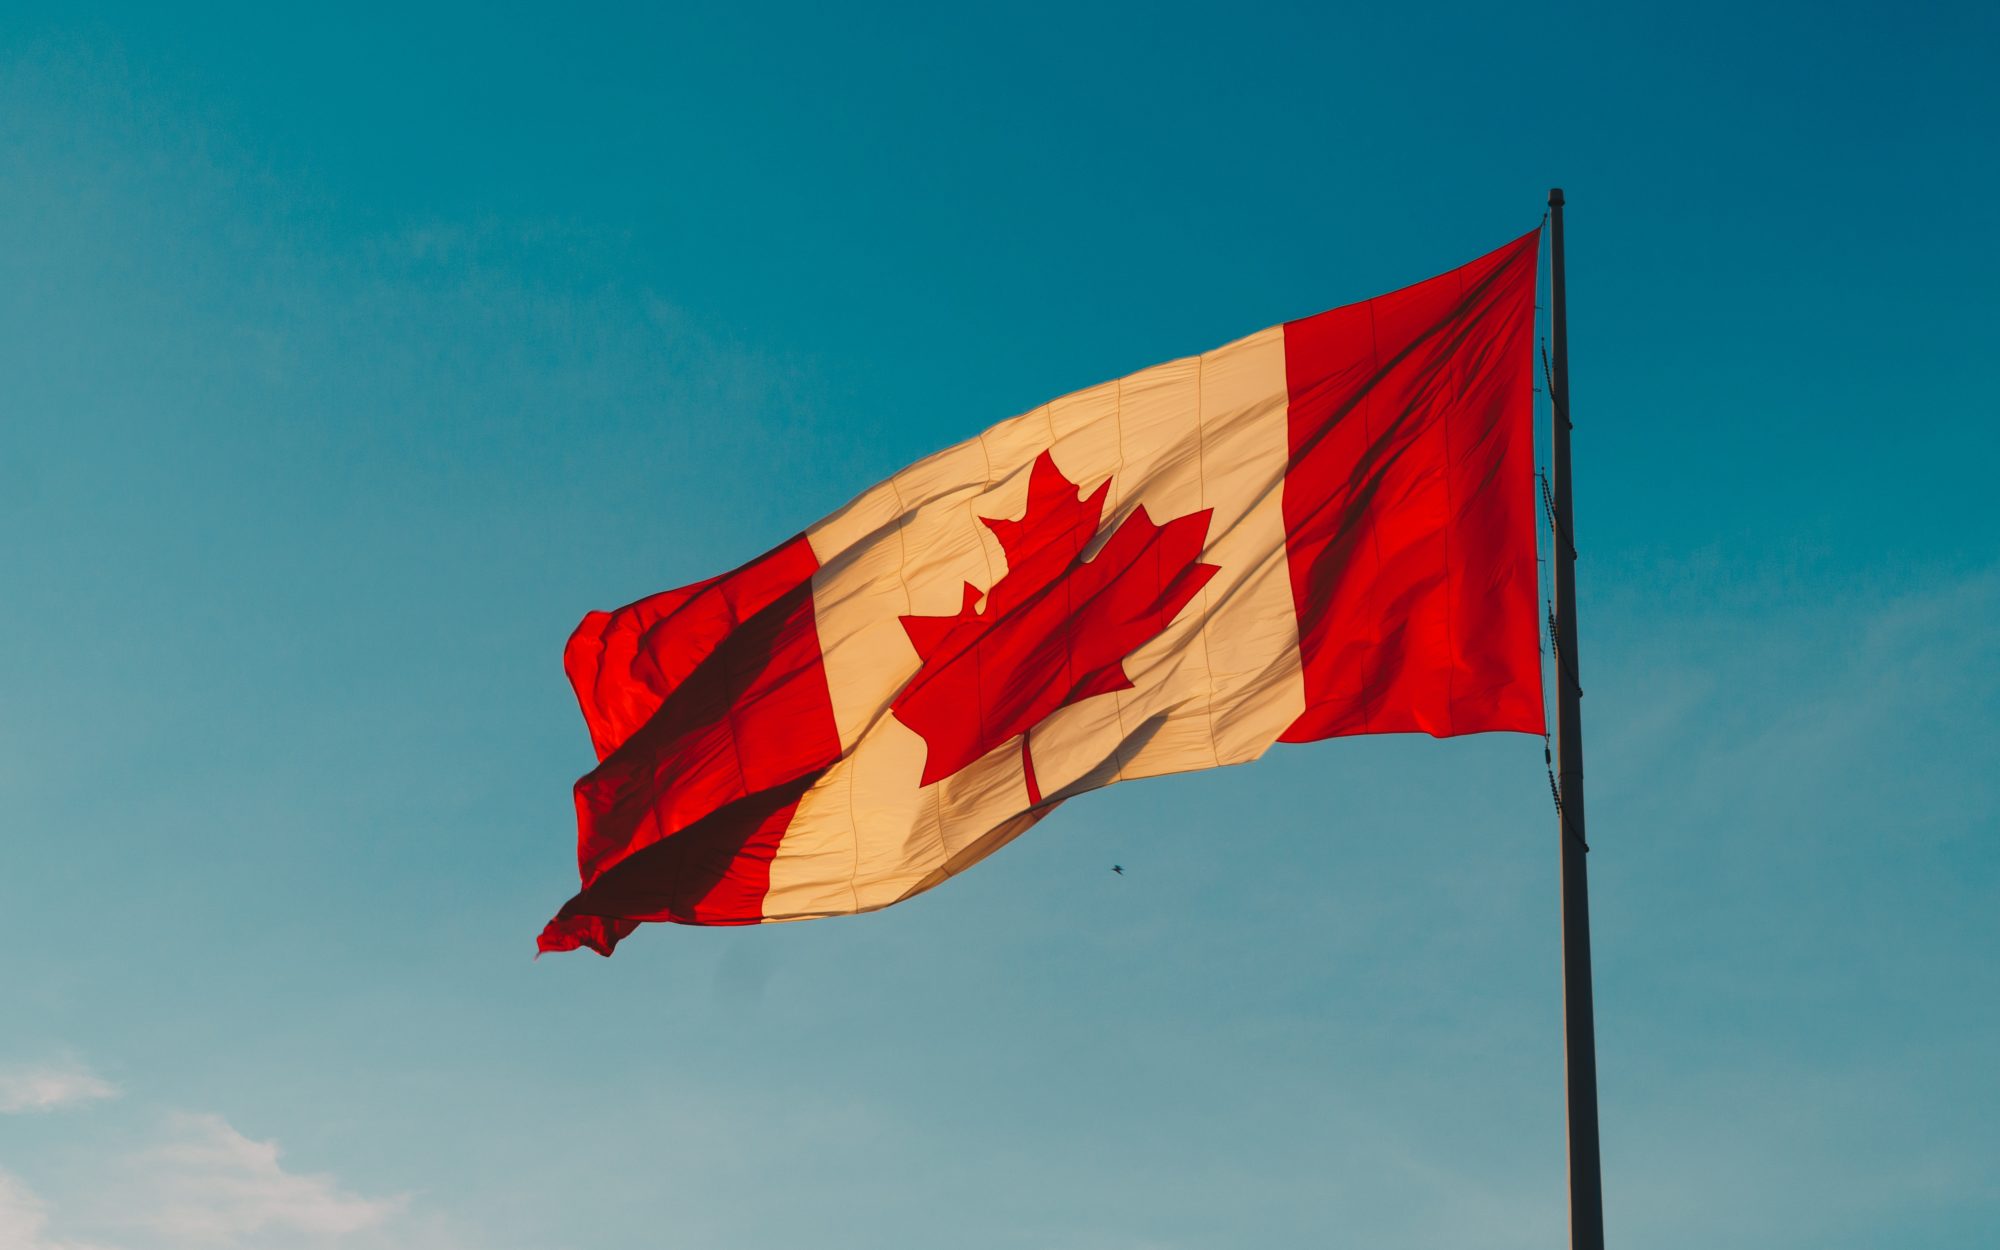 A large Canadian flag flying against a blue sky.